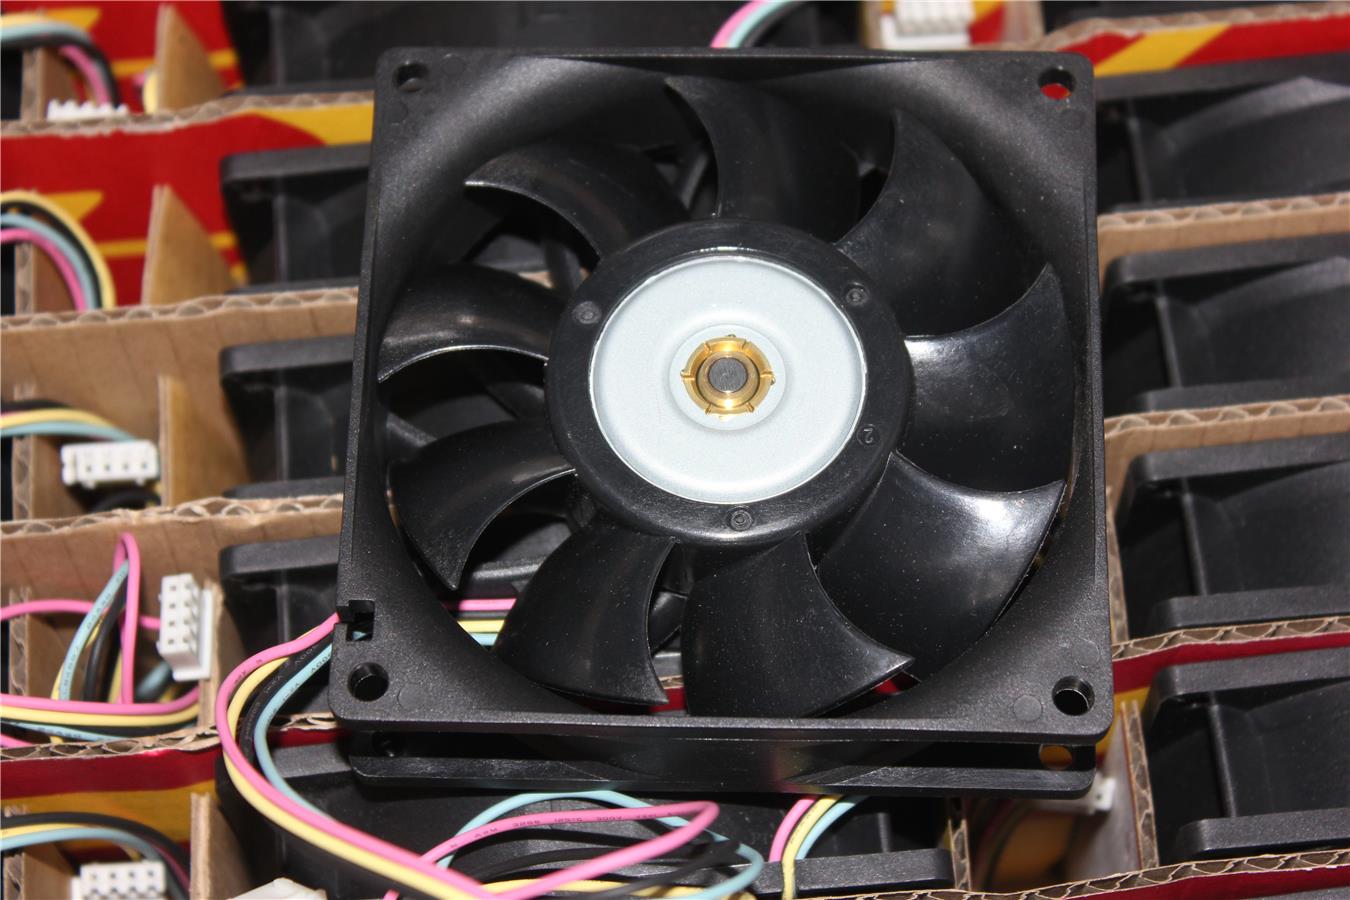 Magic MGT9248UB-W25 48V 0.25A 4-wire pressurized chassis cooling fan